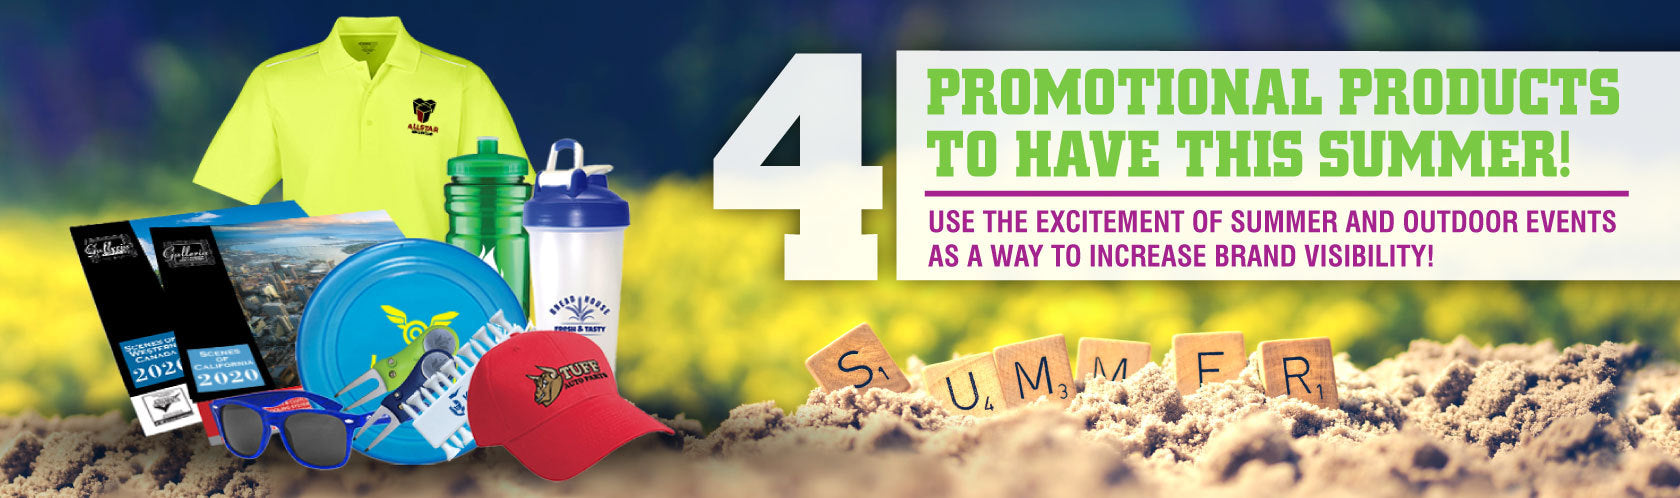 4 Promotional Products to have this summer!